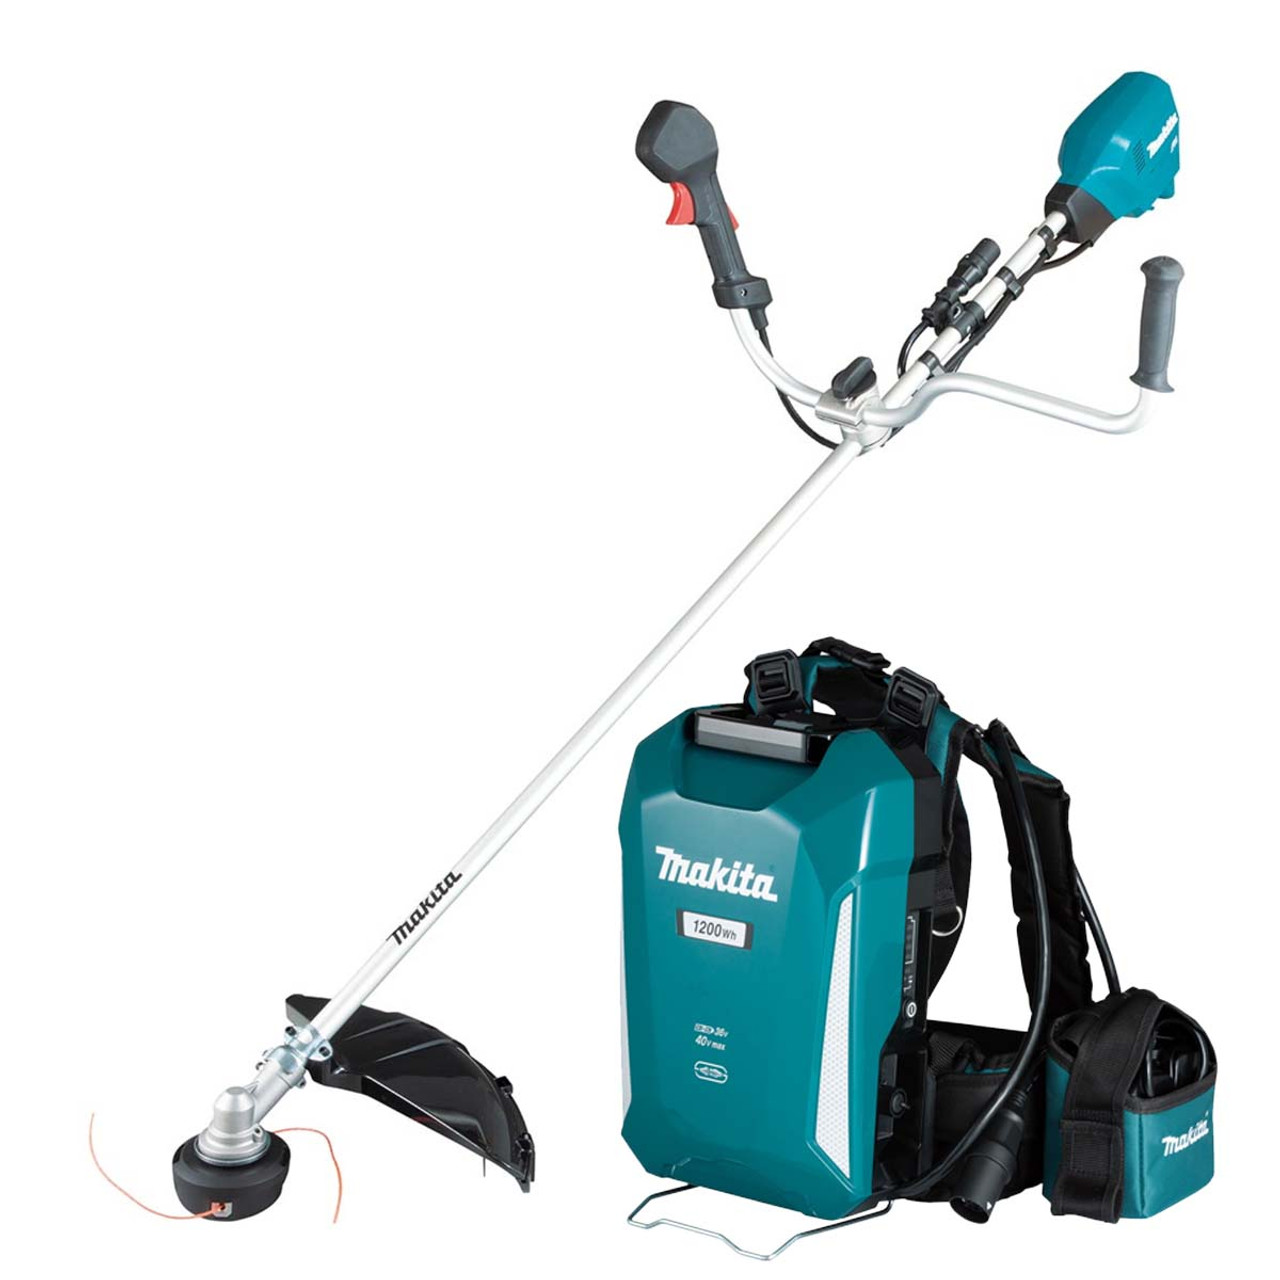 Makita UR101CX1 36V Brushless Brush Cutter with PDC1200A02 33.5Ah Portable Backpack Battery